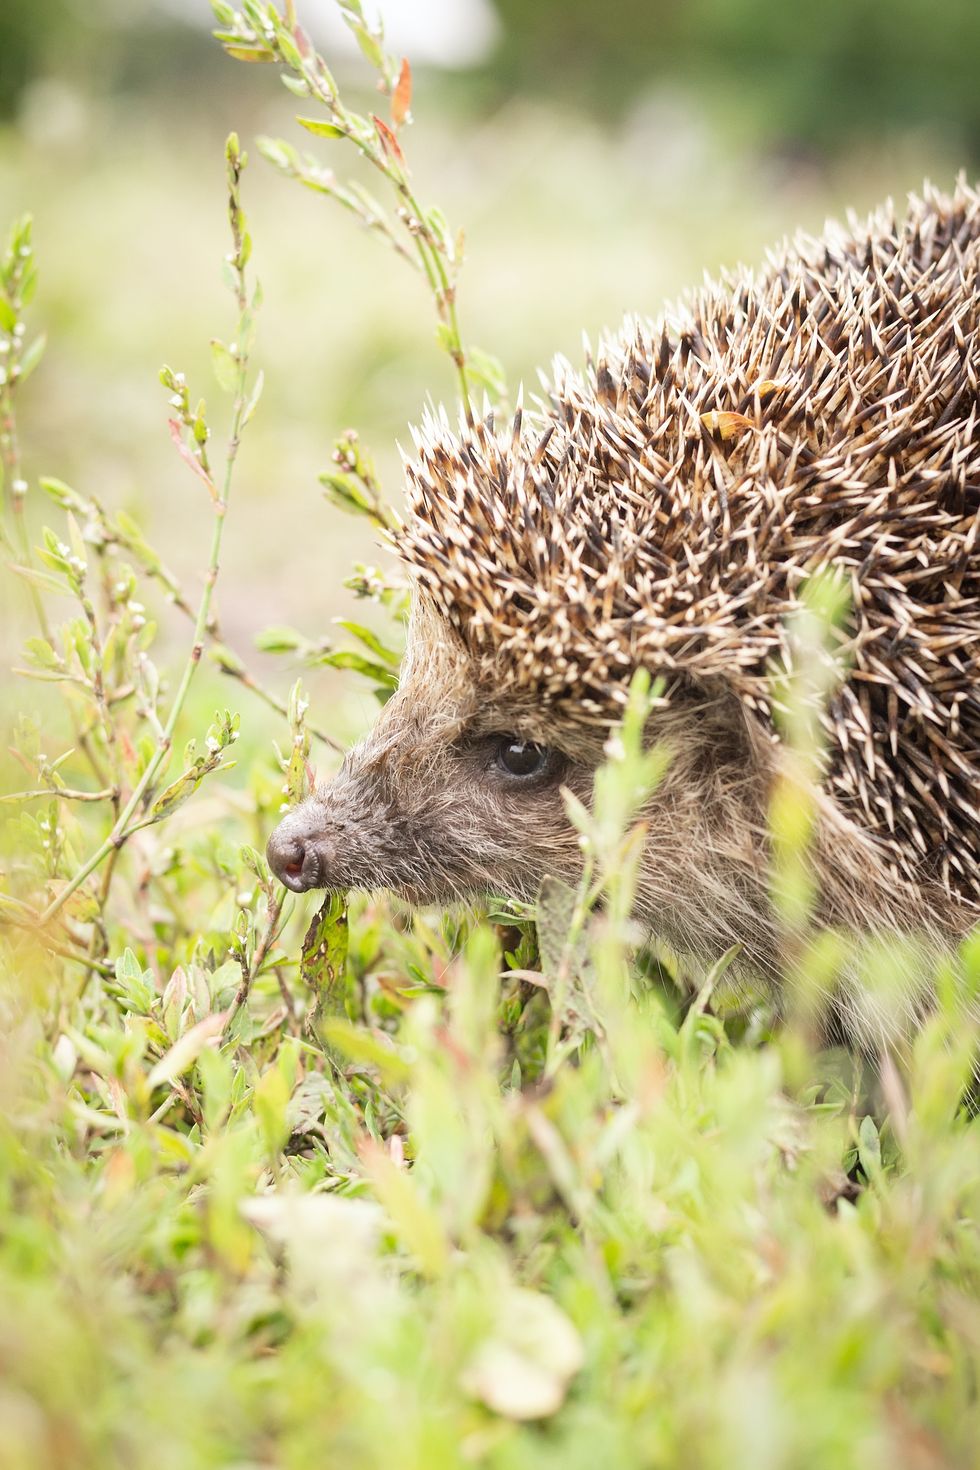 hedgehog, scientific name erinaceus europaeus wild, native, european hedgehog in natural garden habitat with green grass and yellow buttercup space for copy horizontal